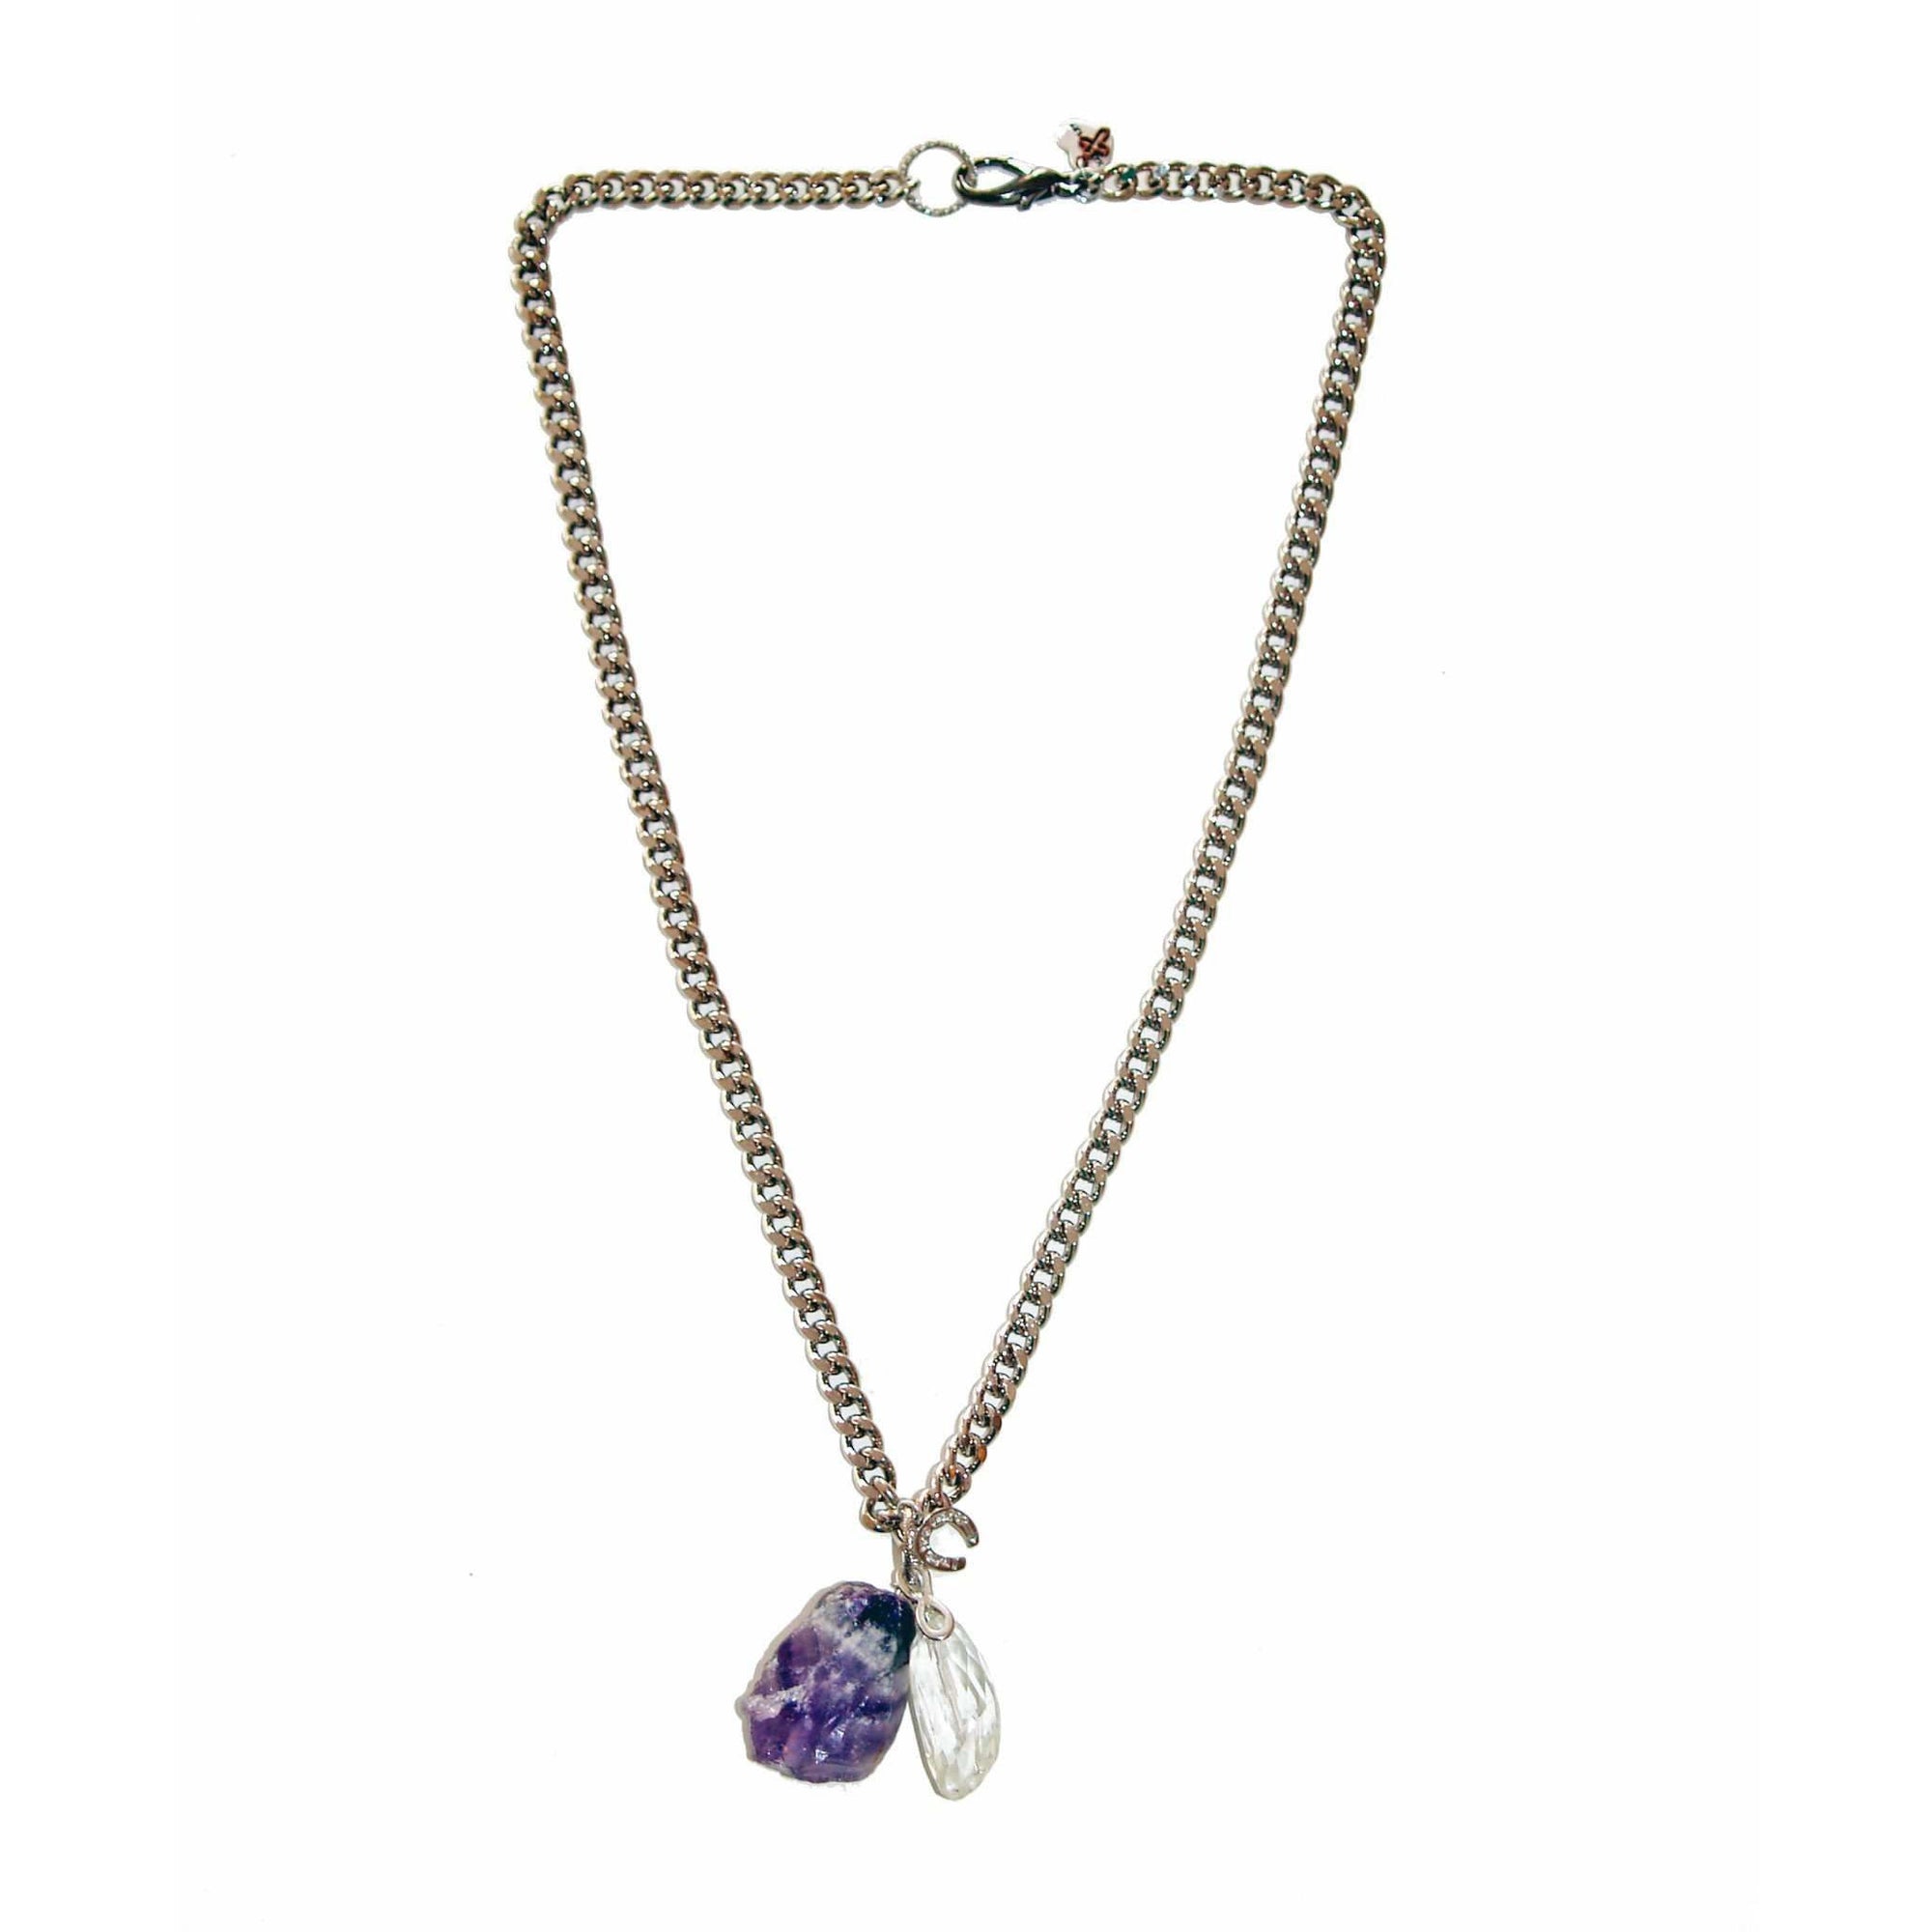 Silver Necklace With Amethyst and Rock Crystal Stones - Miraposa